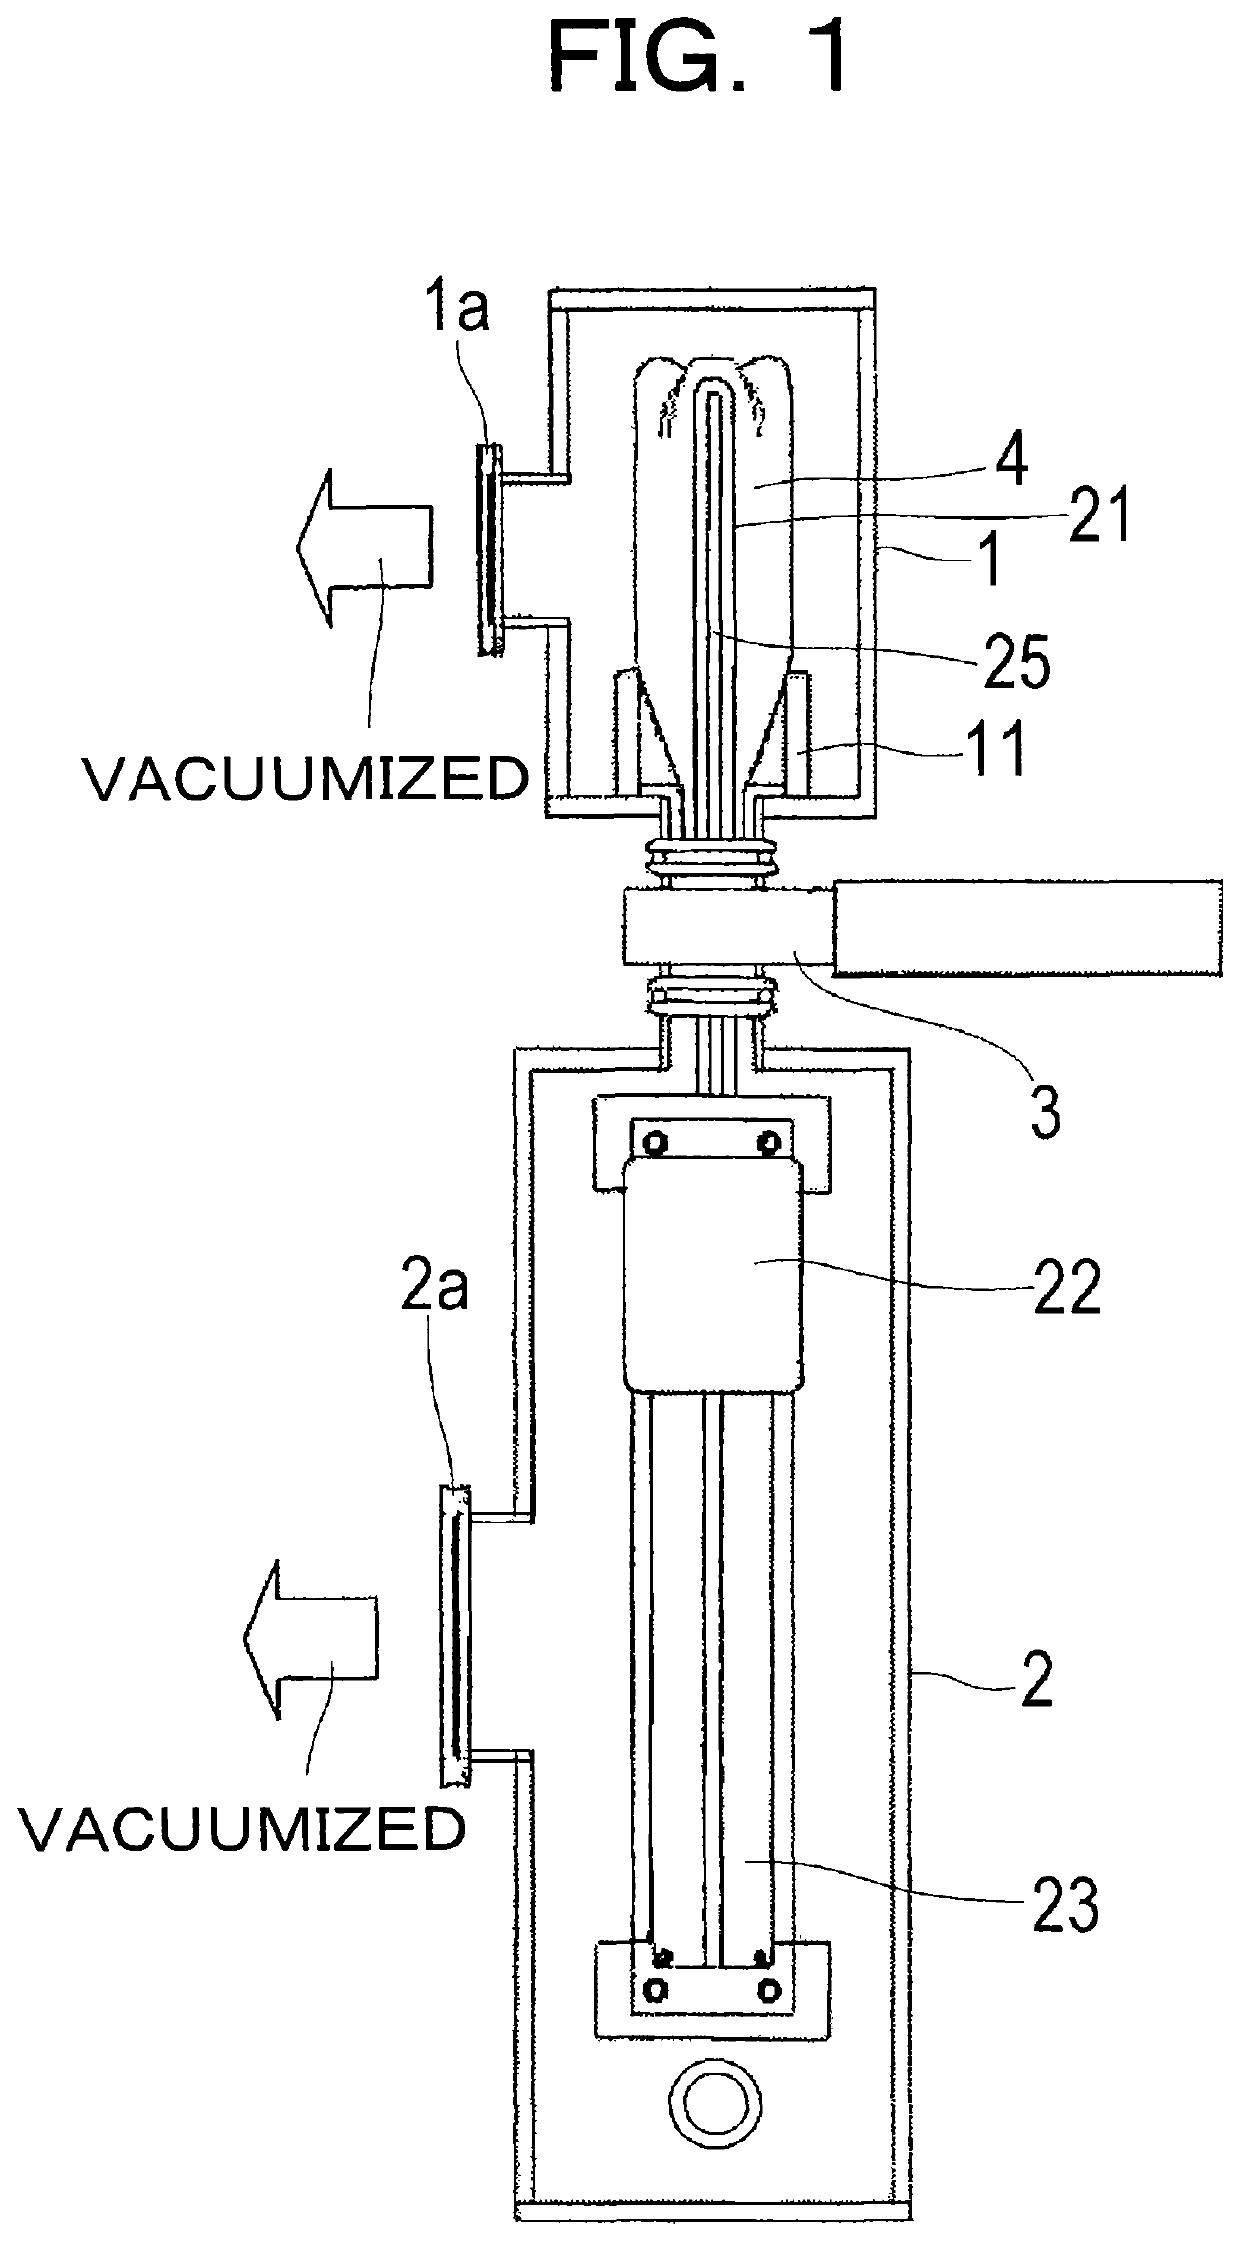 Apparatus for forming thin film